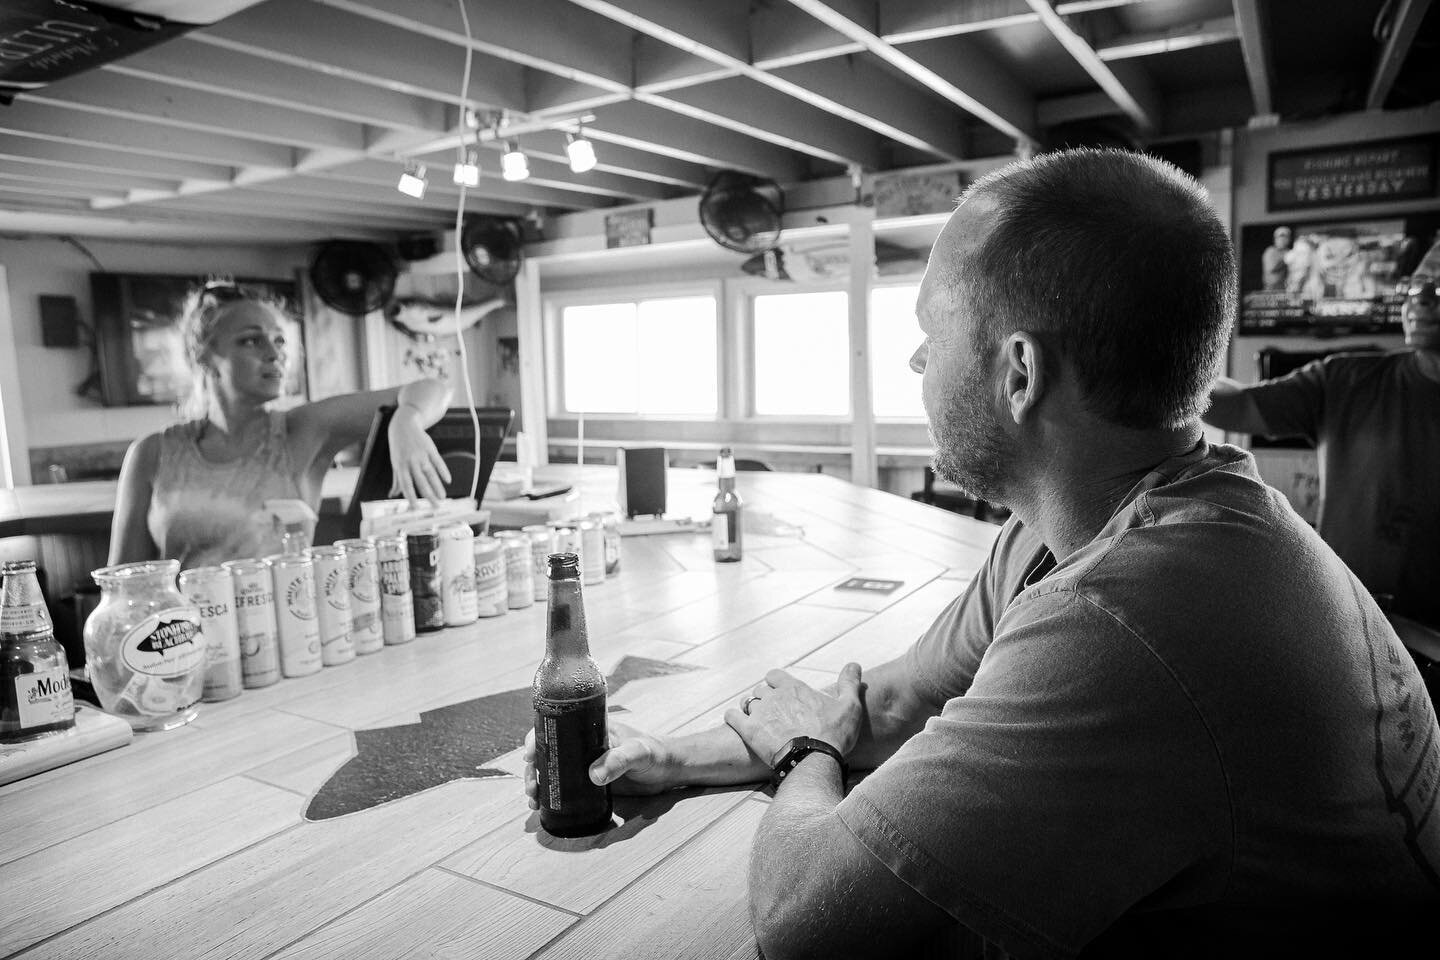 Ran into an ol buddy at Avalon Pier a few months back. We sat and caught up over a few beers... Nothin like it. .
.
.
#apakmedia #blackandwhite #avalonpier #kdh #babysteak #obx #burnmagazine #fish